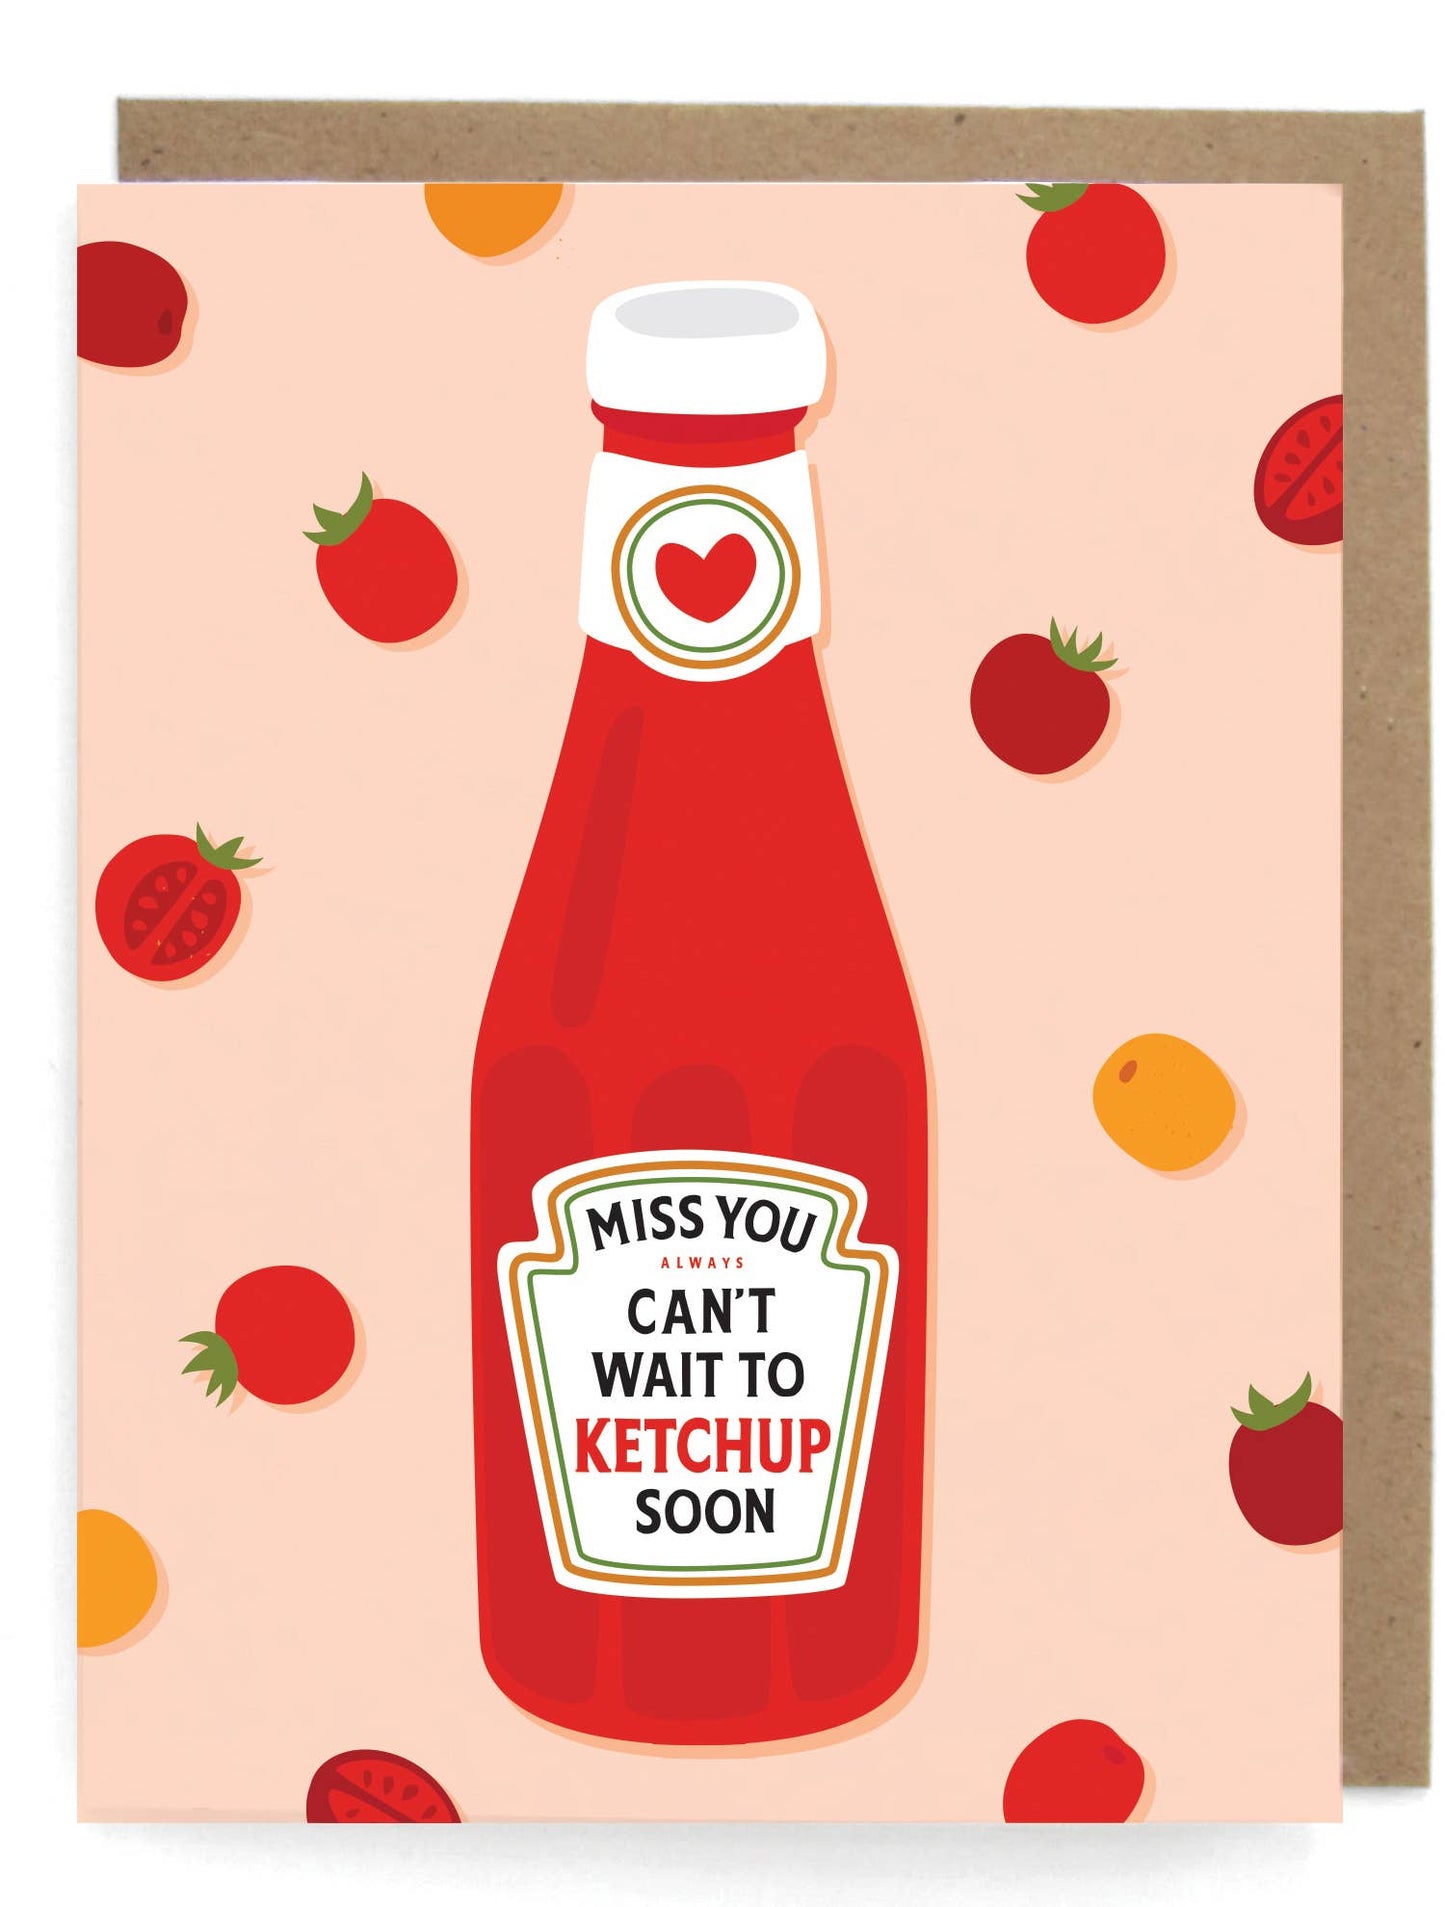 Ketchup greeting card that reads "Miss You Can't Wait To Ketchup Soon" 